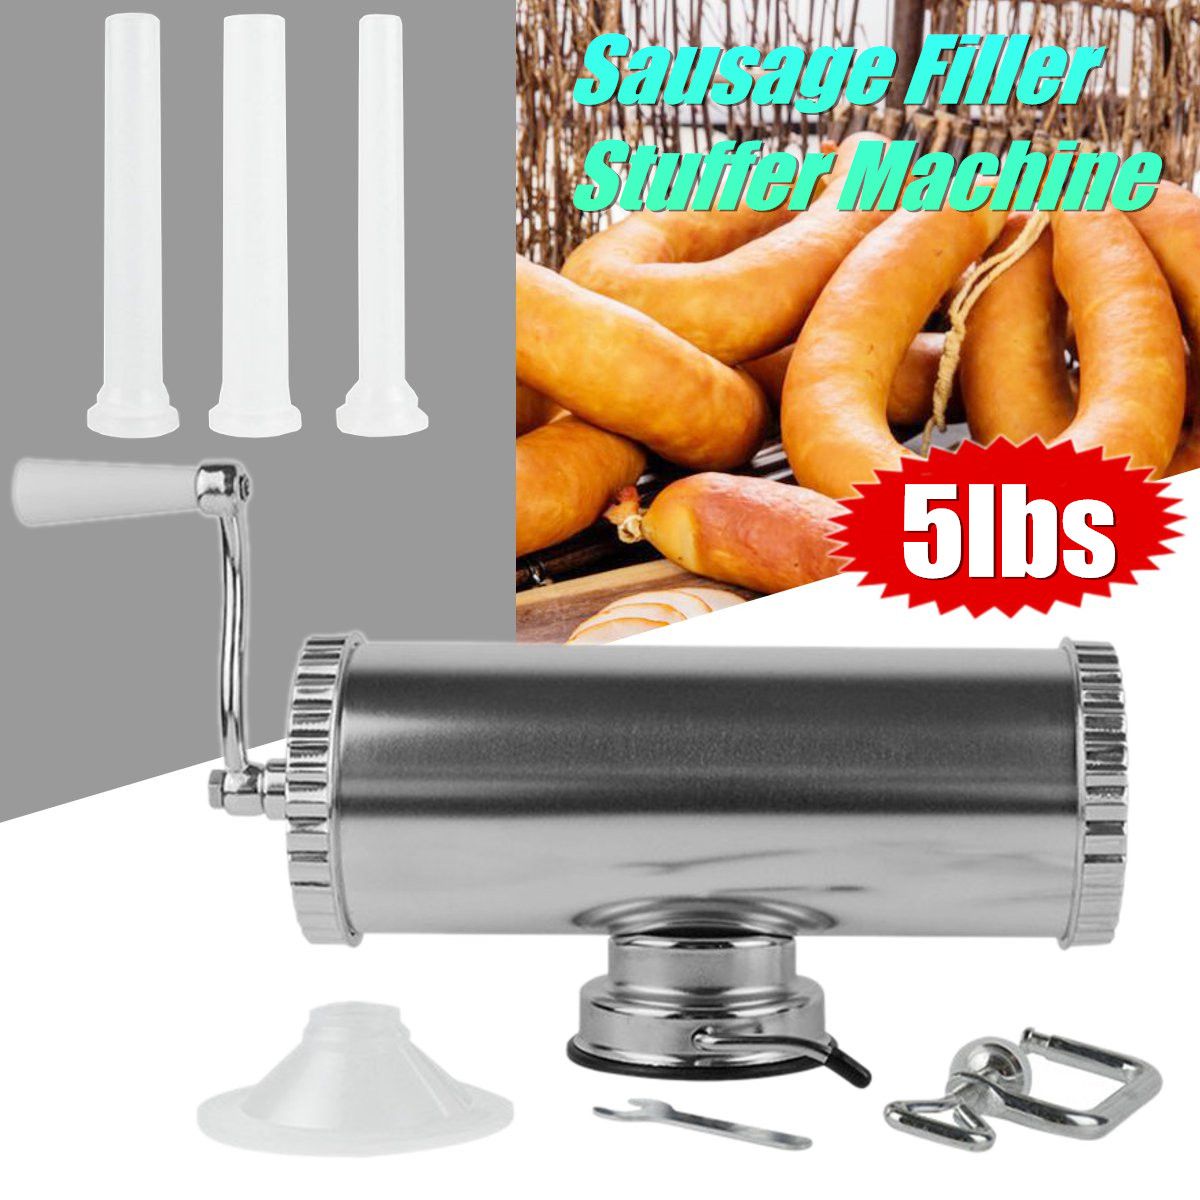 5lbs-Homemade-Meat-Sausage-Filler-Stuffer-Machine-Stainless-Steel-Sausage-Filling-Machine-Sausage-Sy-1578290